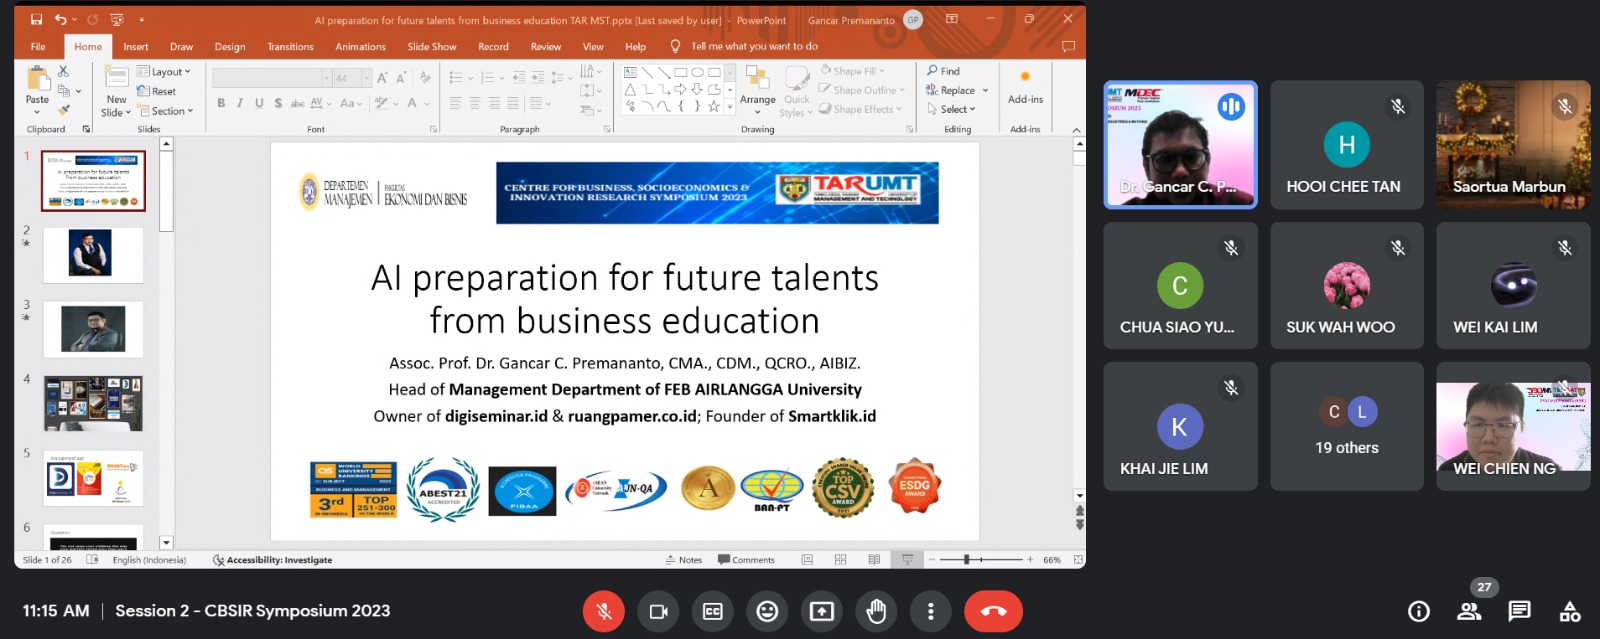 Discussing about AI Preparation in Business Education 1